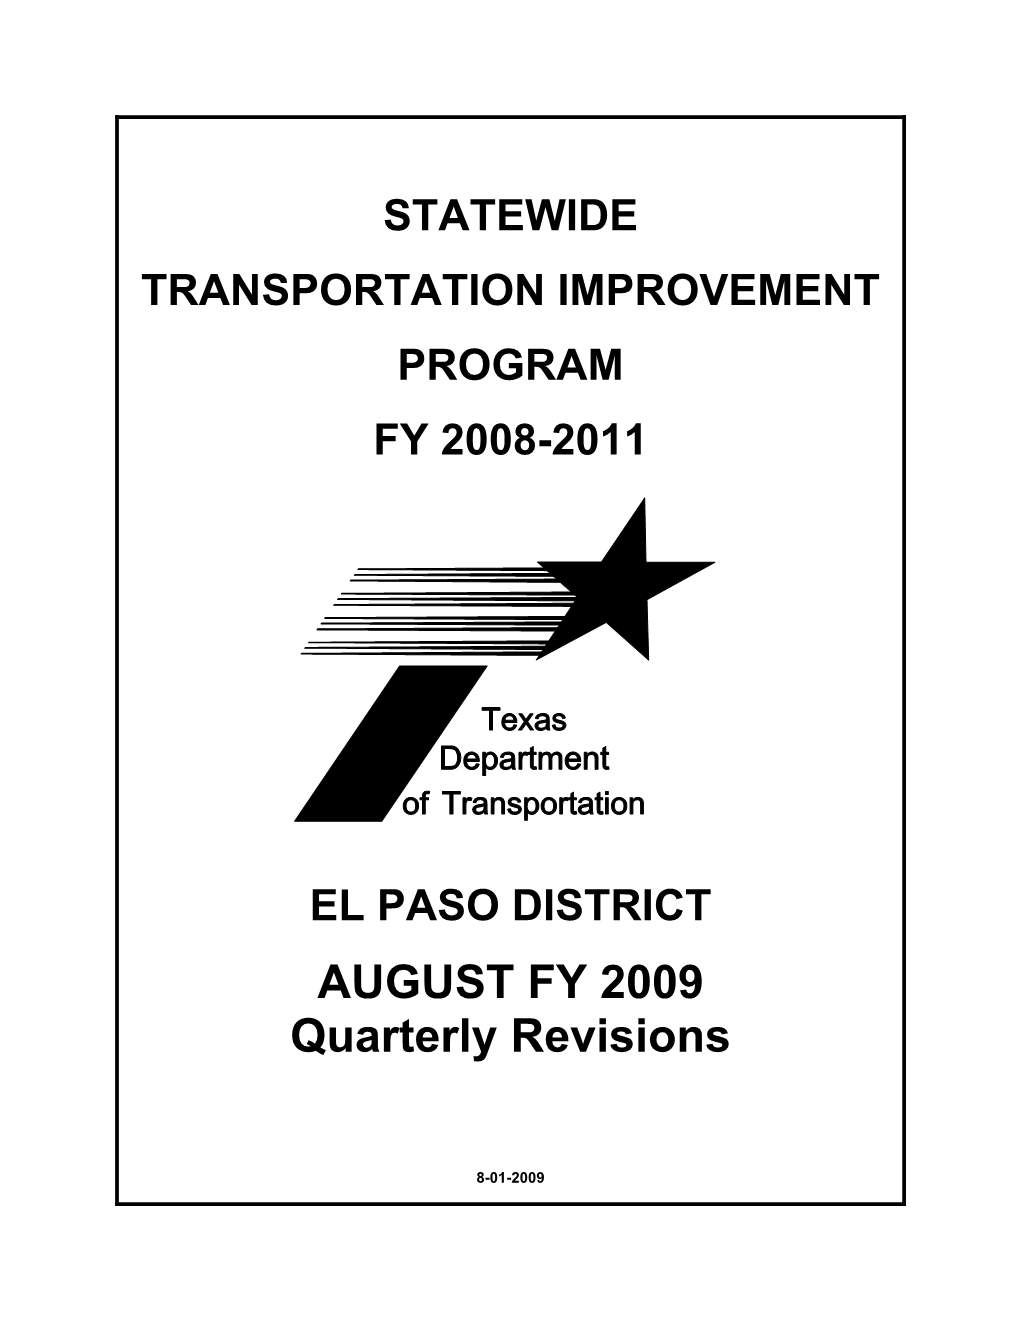 AUGUST FY 2009 Quarterly Revisions